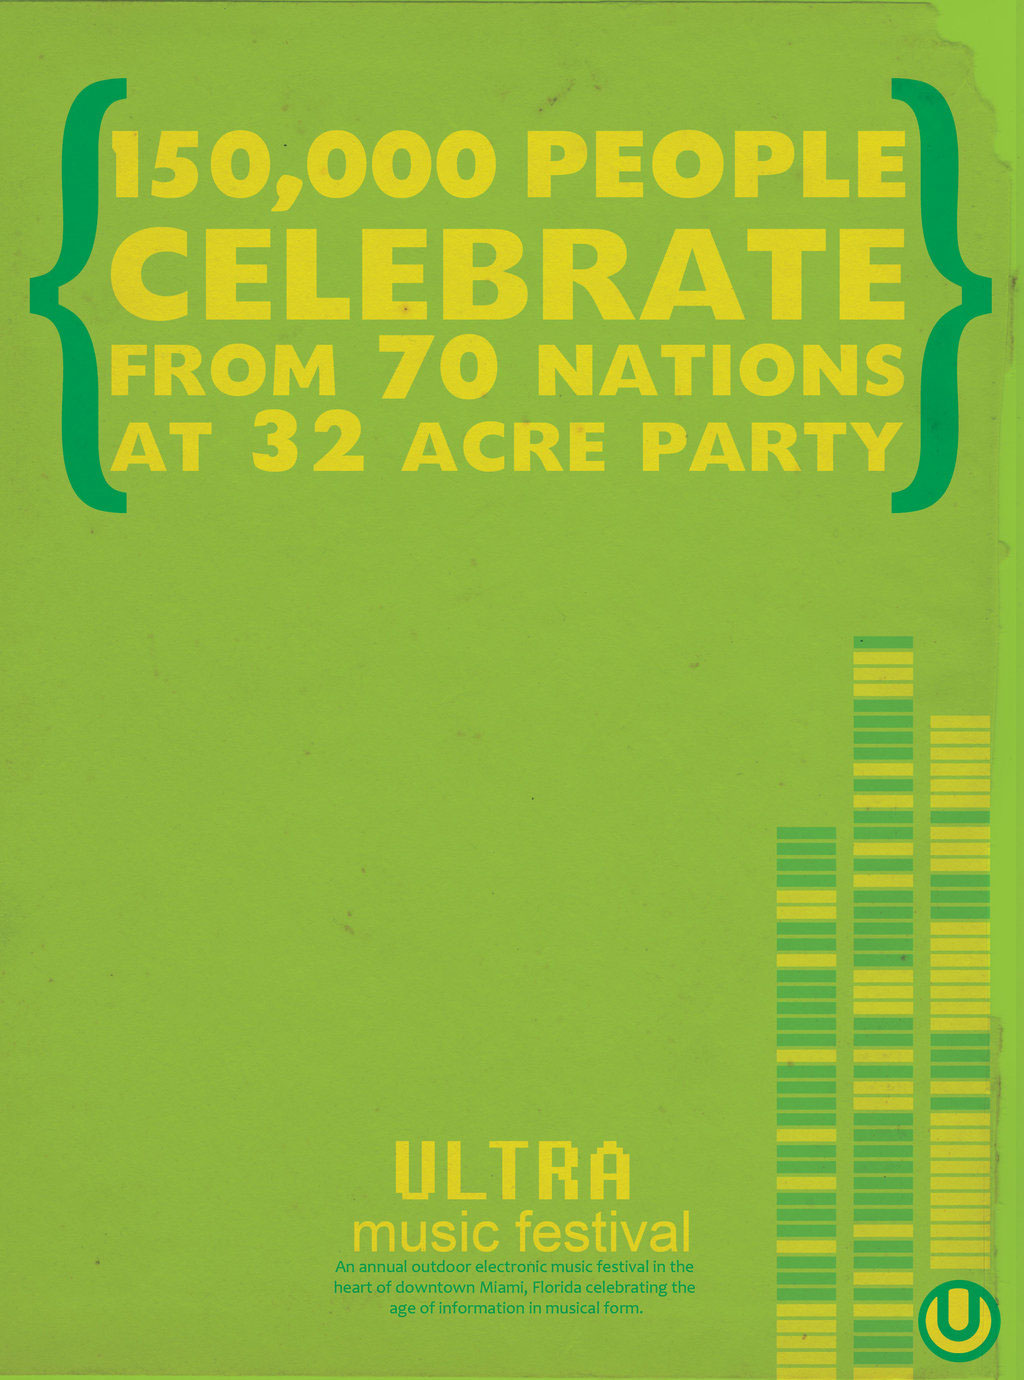 Magazine ad stating 150,000 people celebrate from 70 nations at 32 acre party.